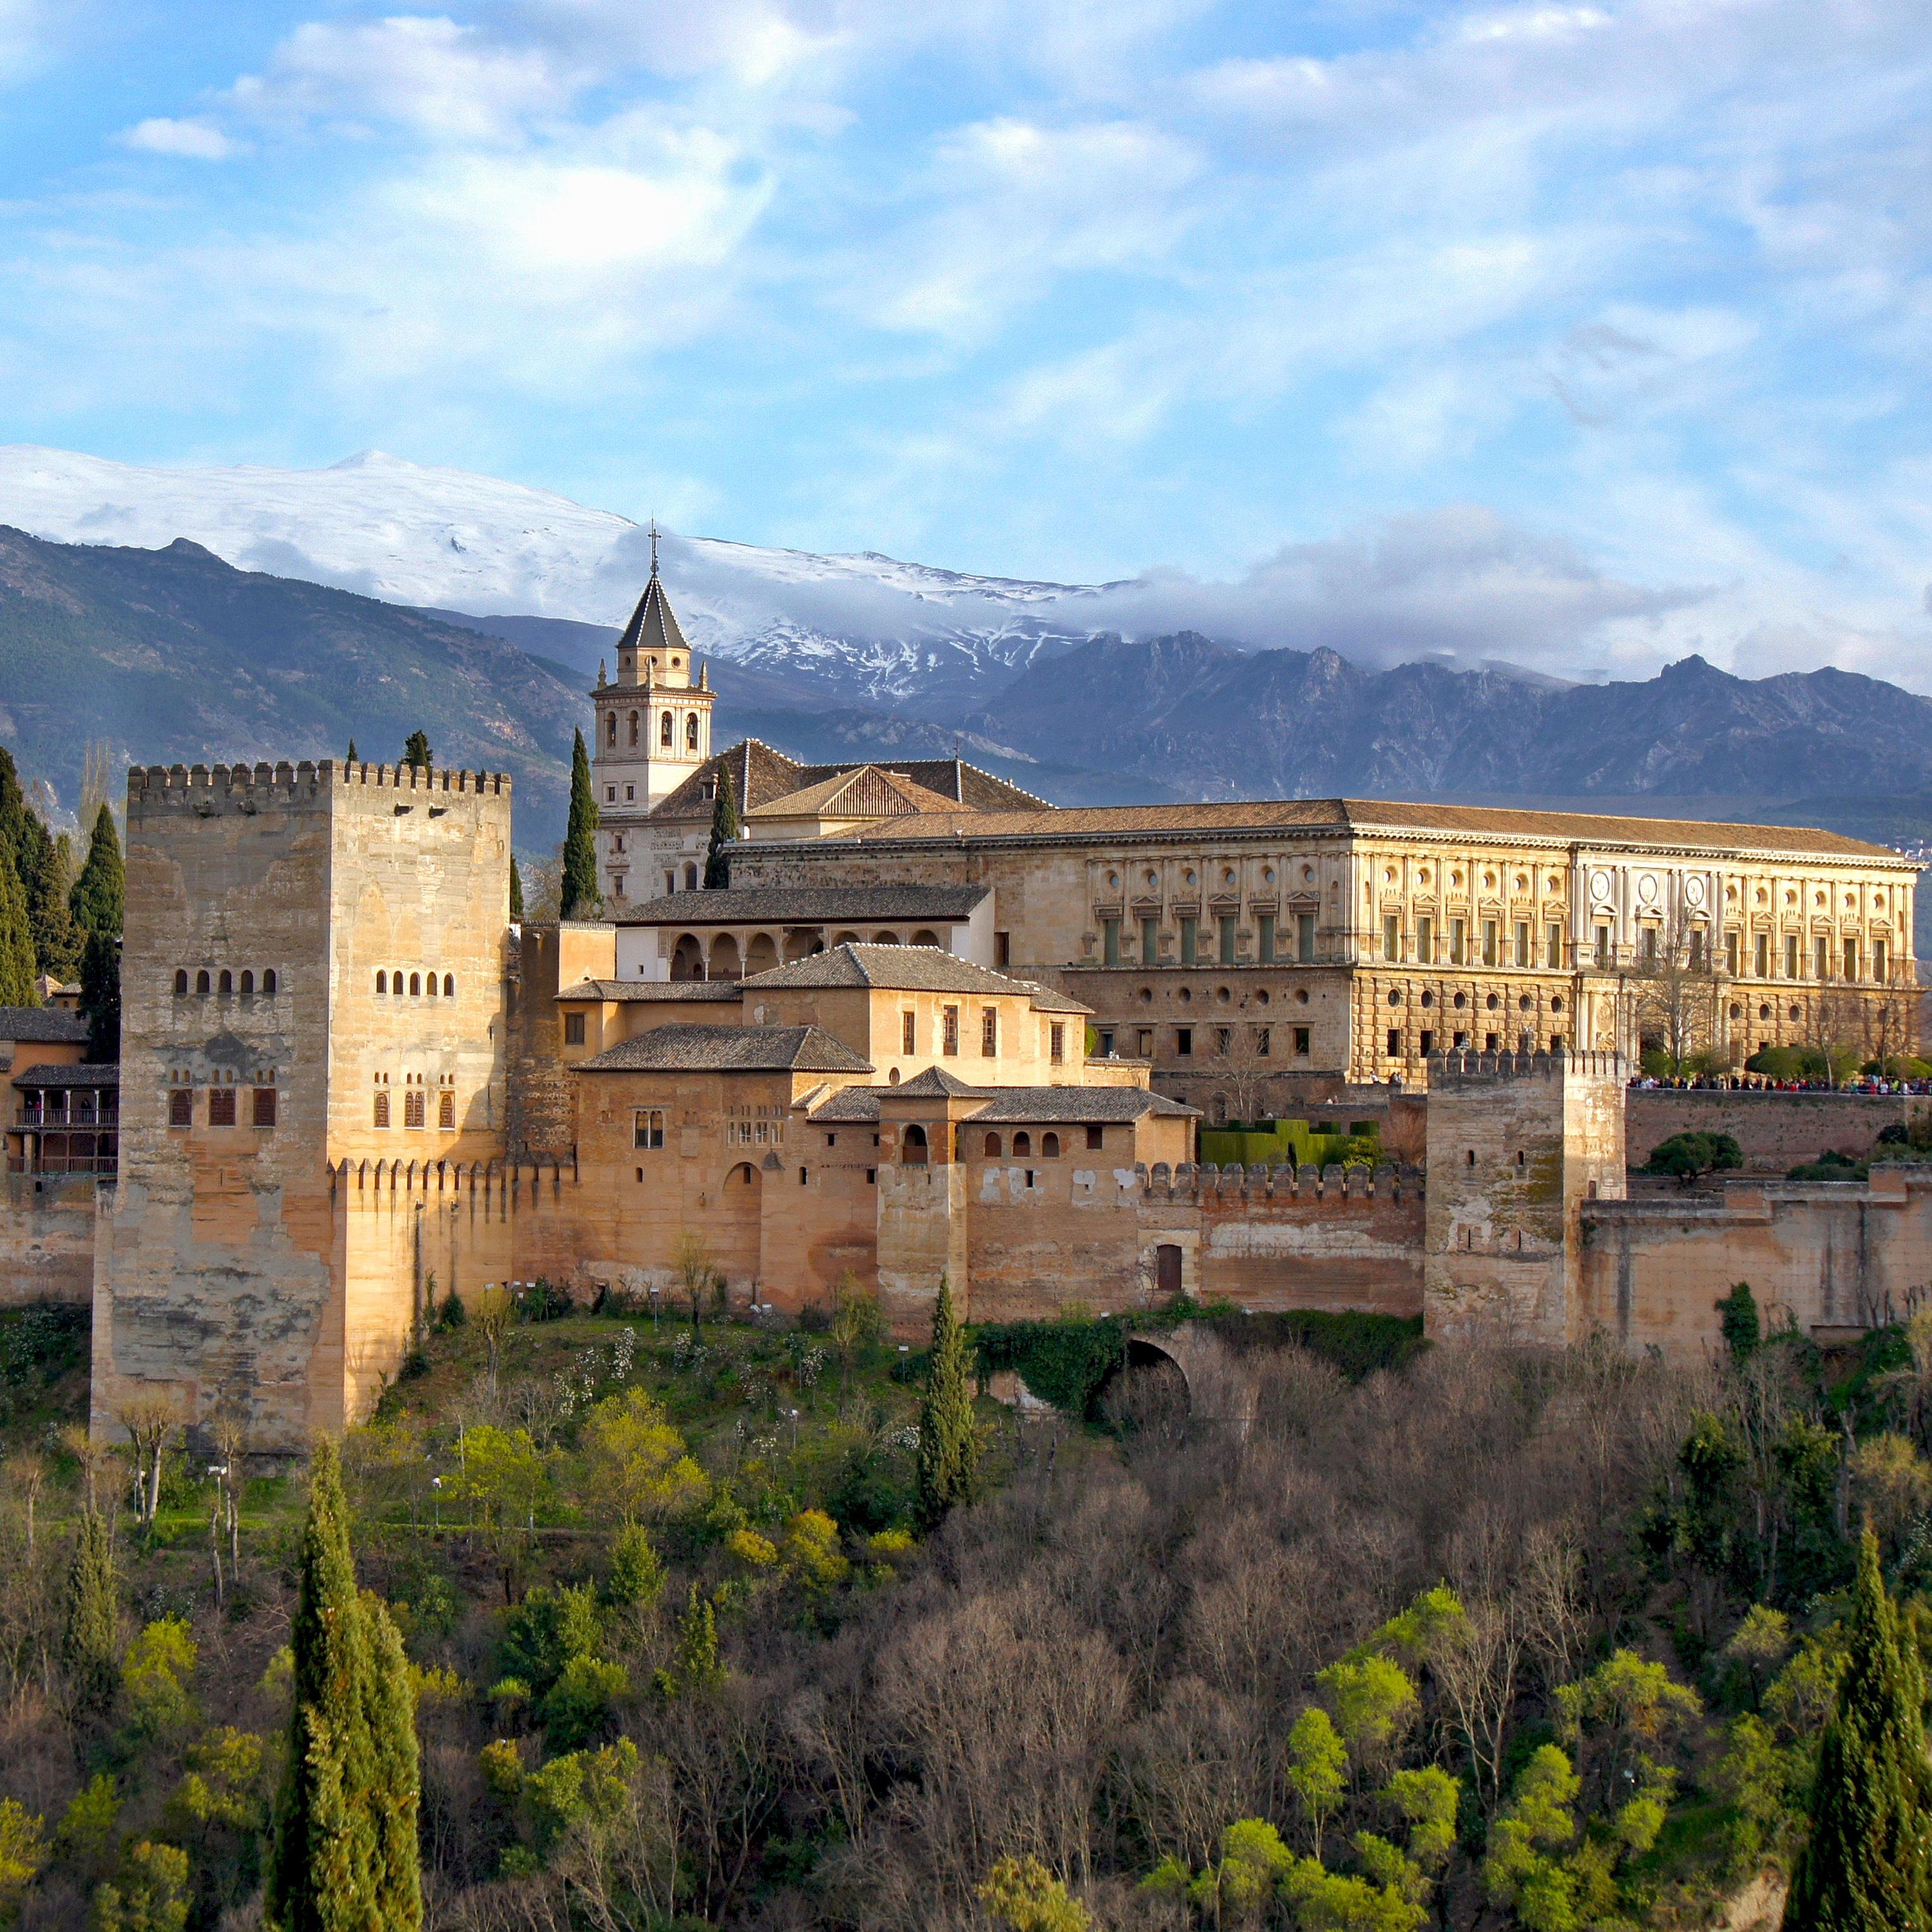 The Alhambra in Granada: 457 reviews and 3921 photos